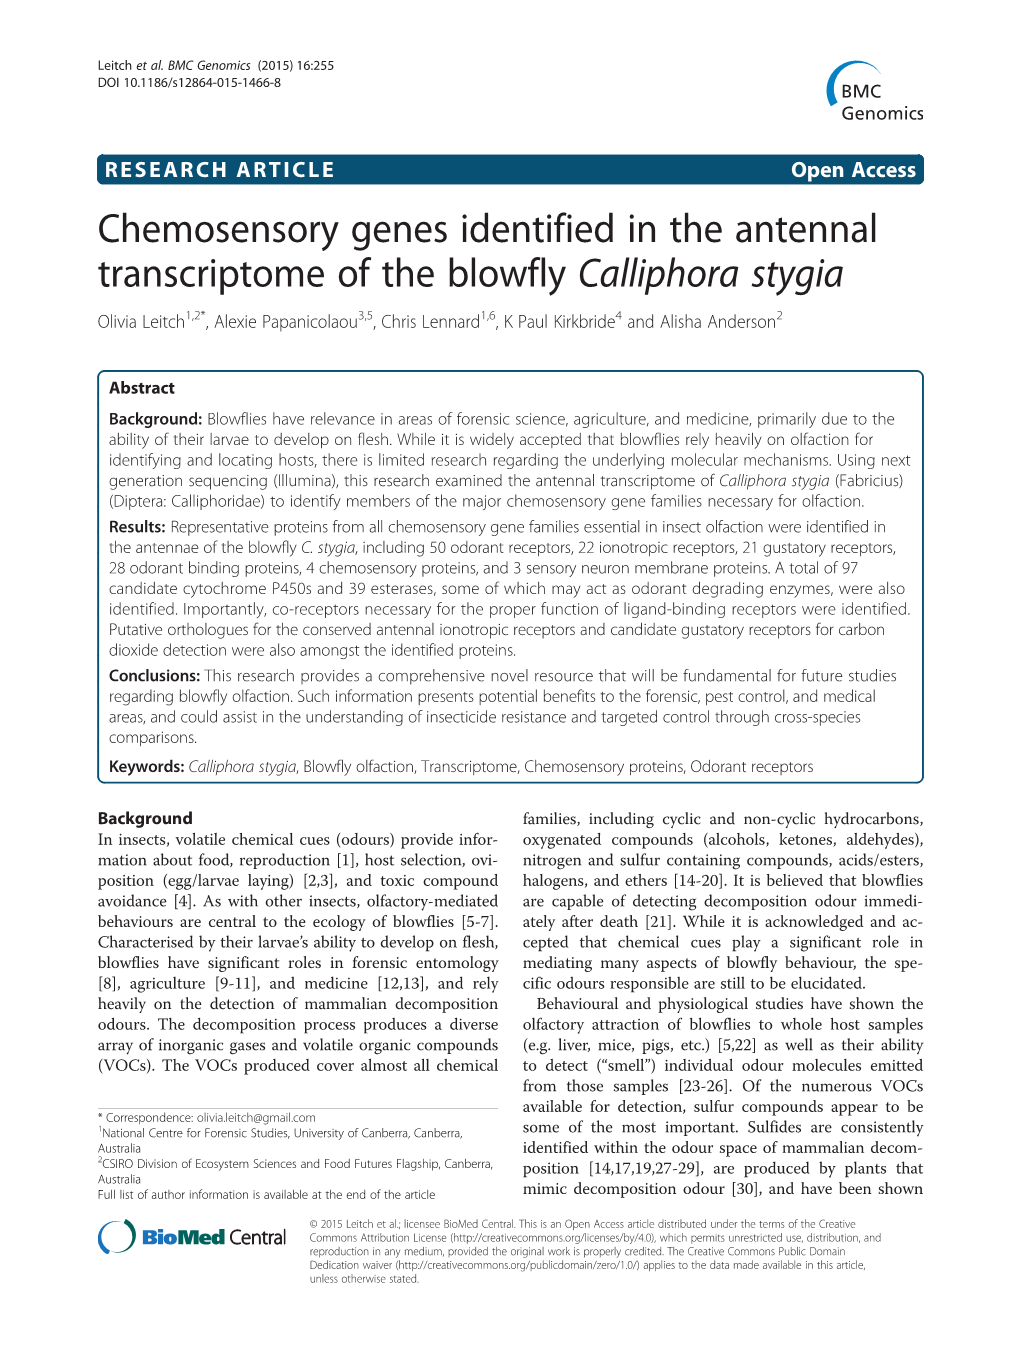 Chemosensory Genes Identified in the Antennal Transcriptome of The